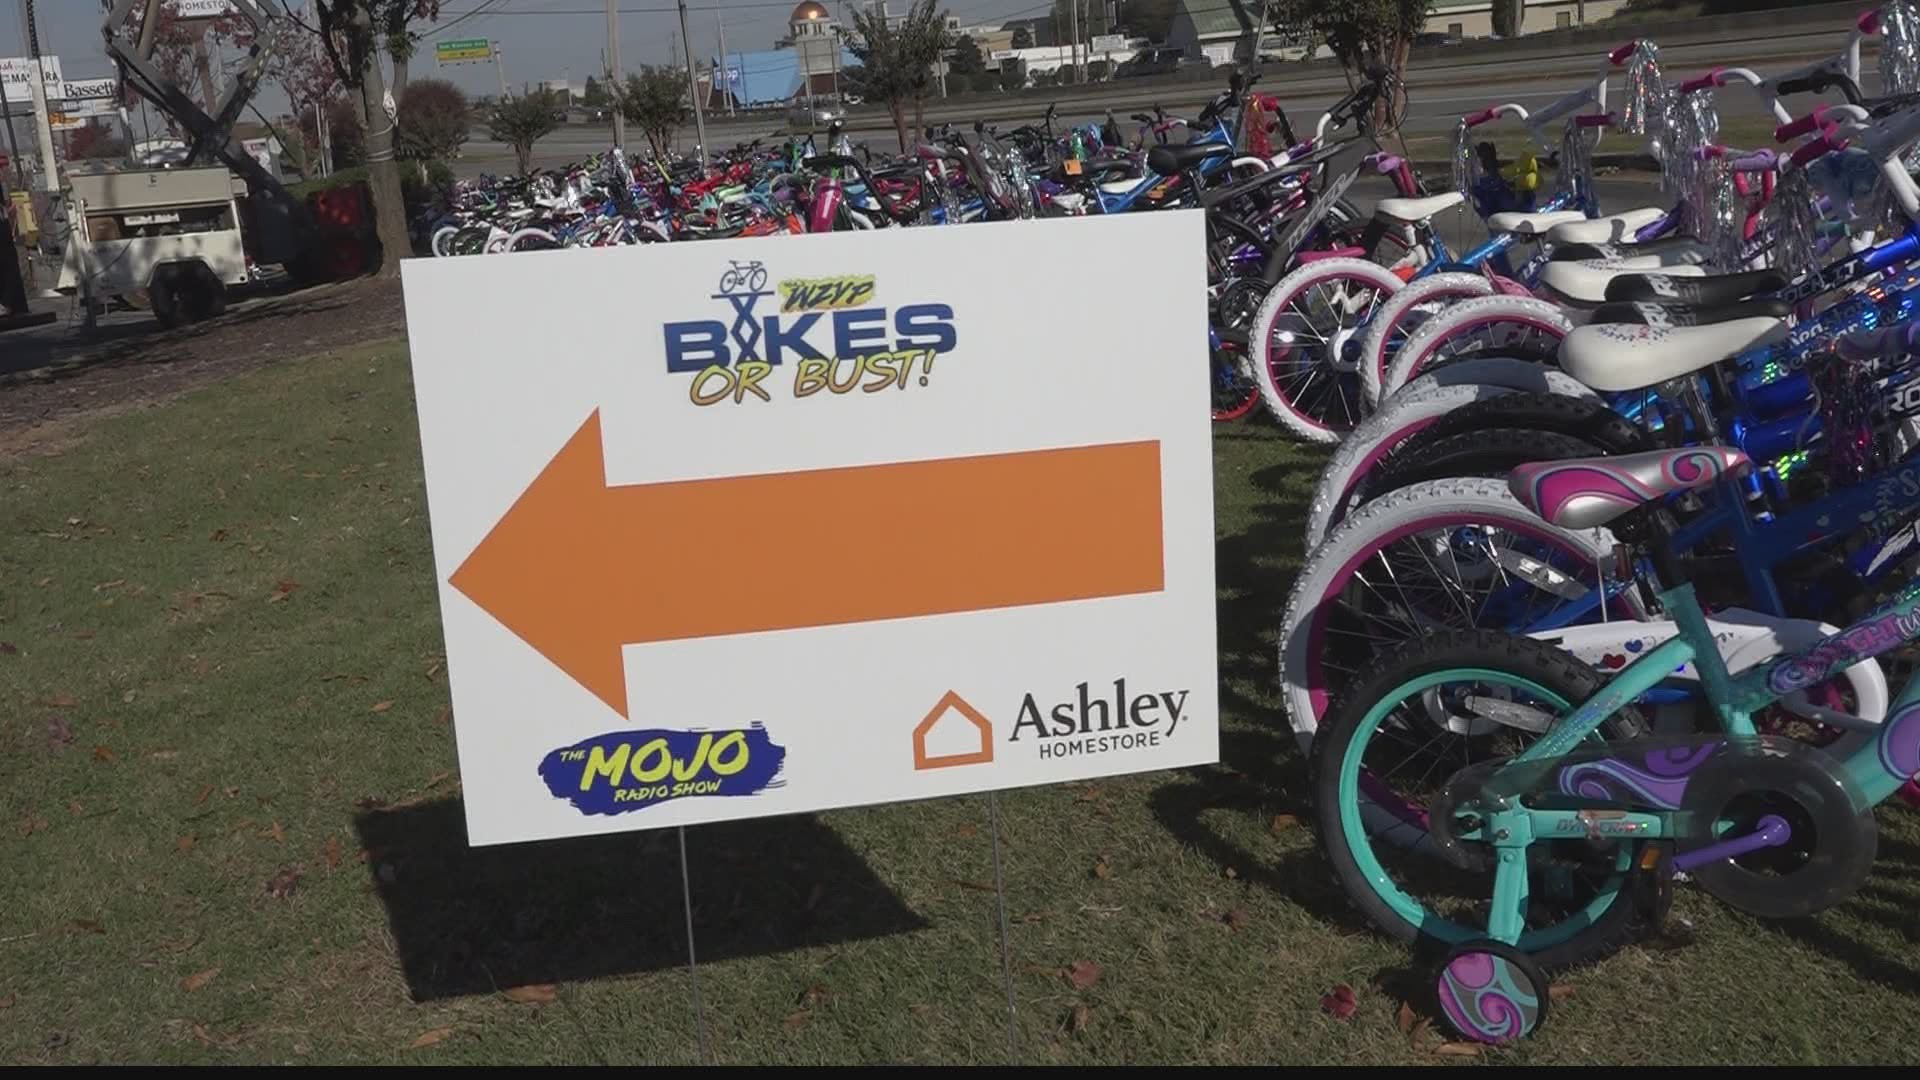 From food donations to bikes, organizations are coming together to make sure nobody goes without during this holiday season.